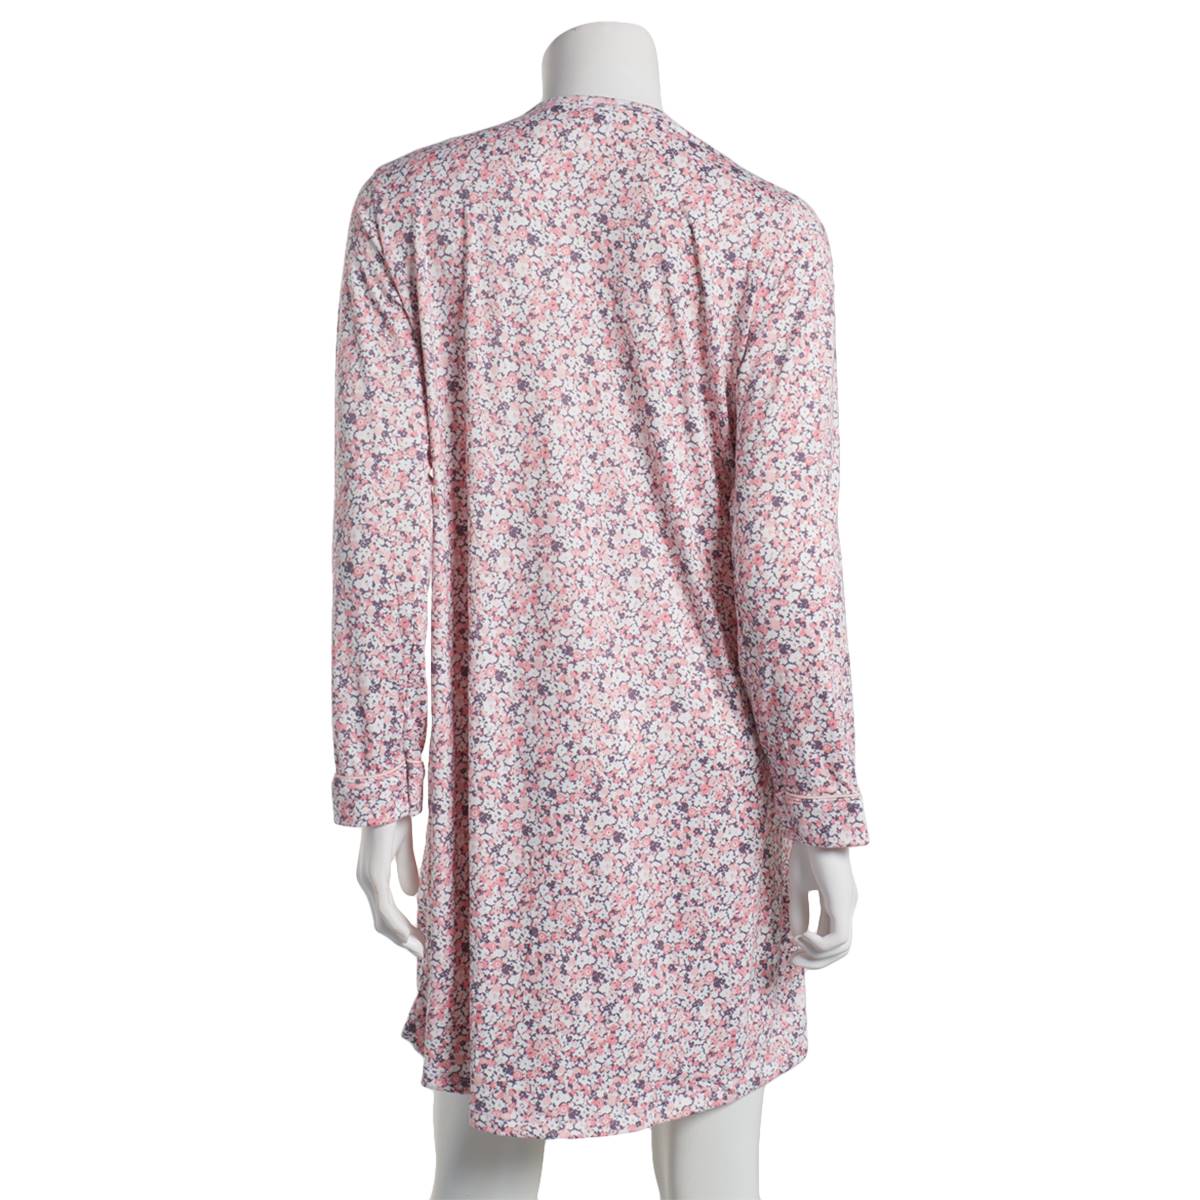 Womens Rene Rofe Graceful Lace Ditsy Floral Nightshirt